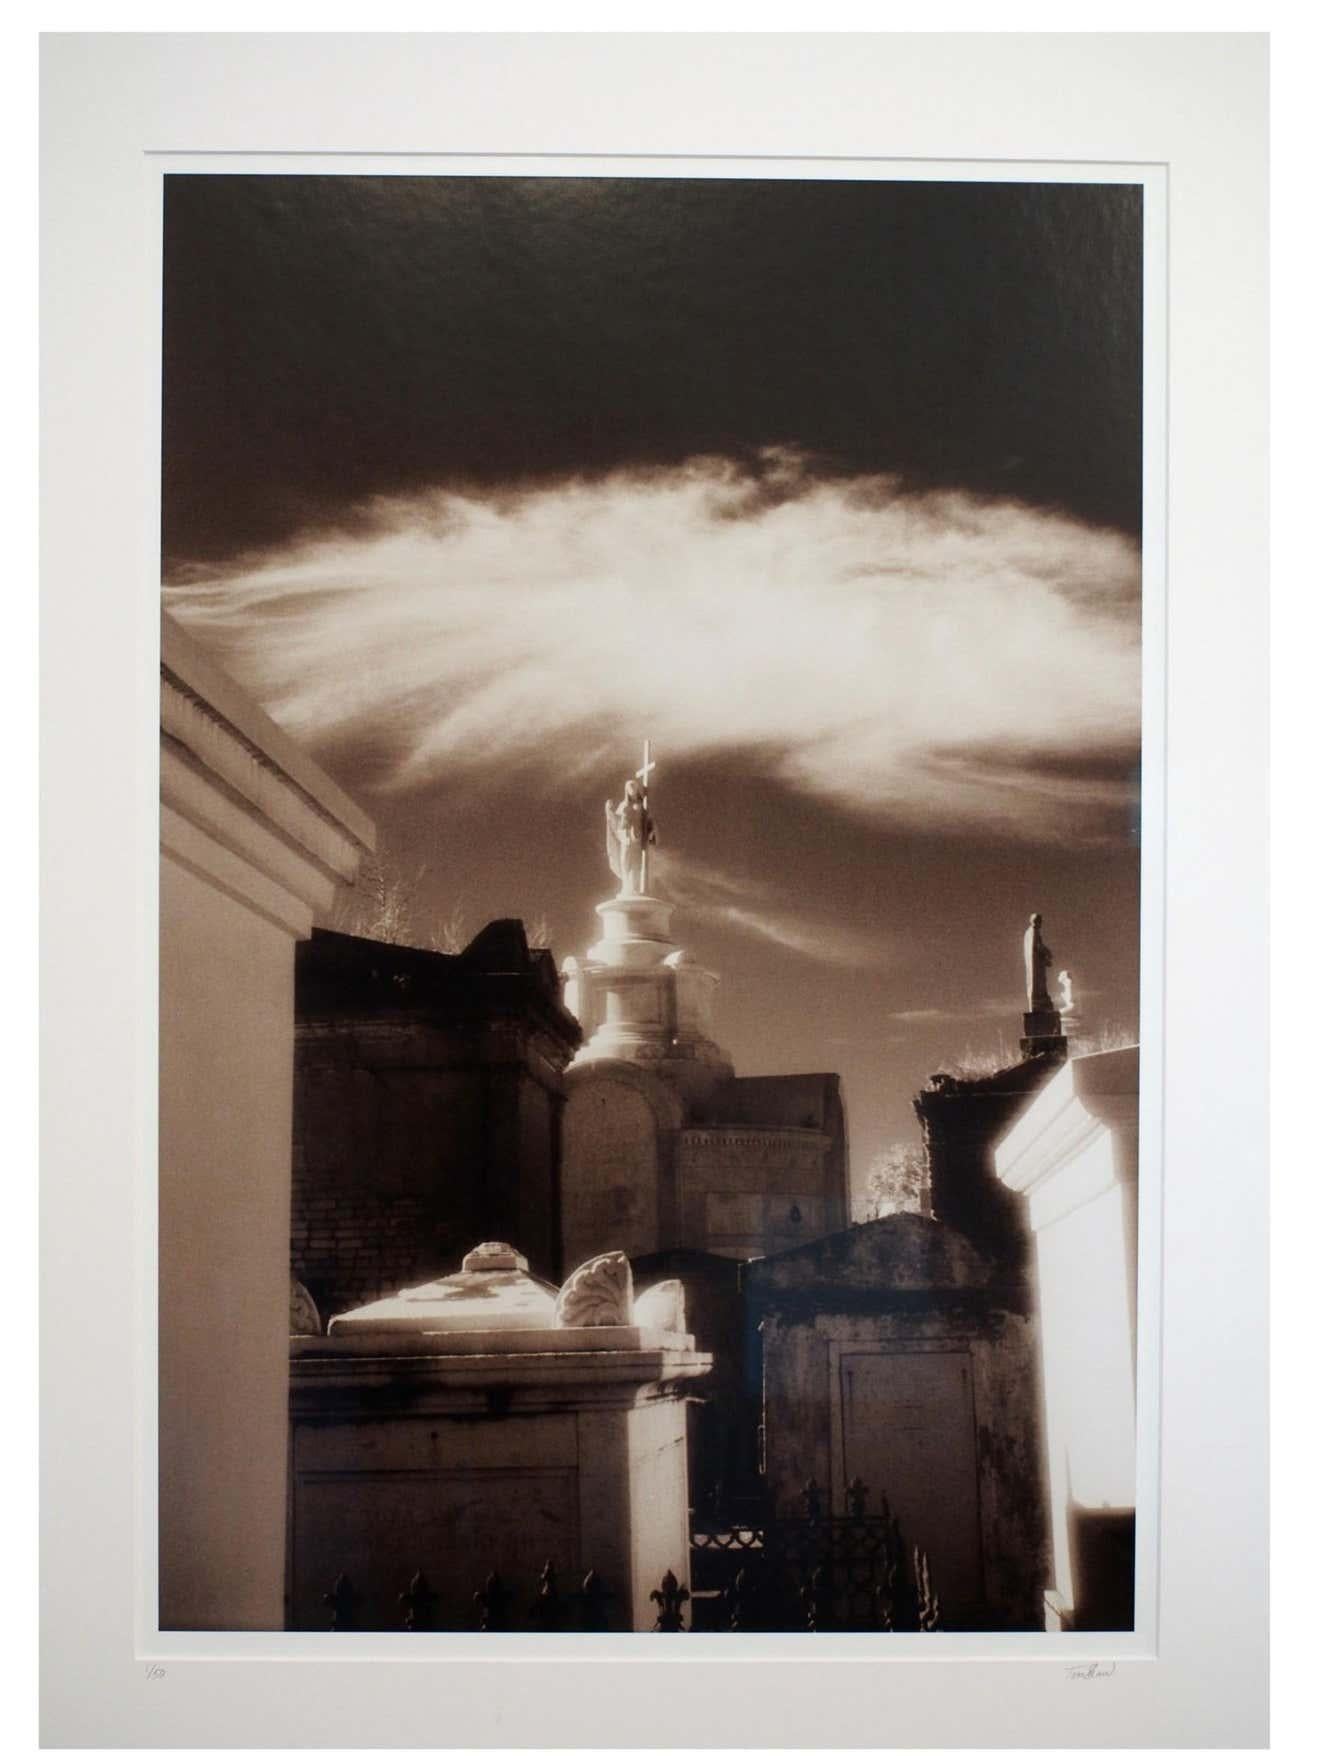 American Photo of New Orleans Cemetery, Infrared, Framed For Sale